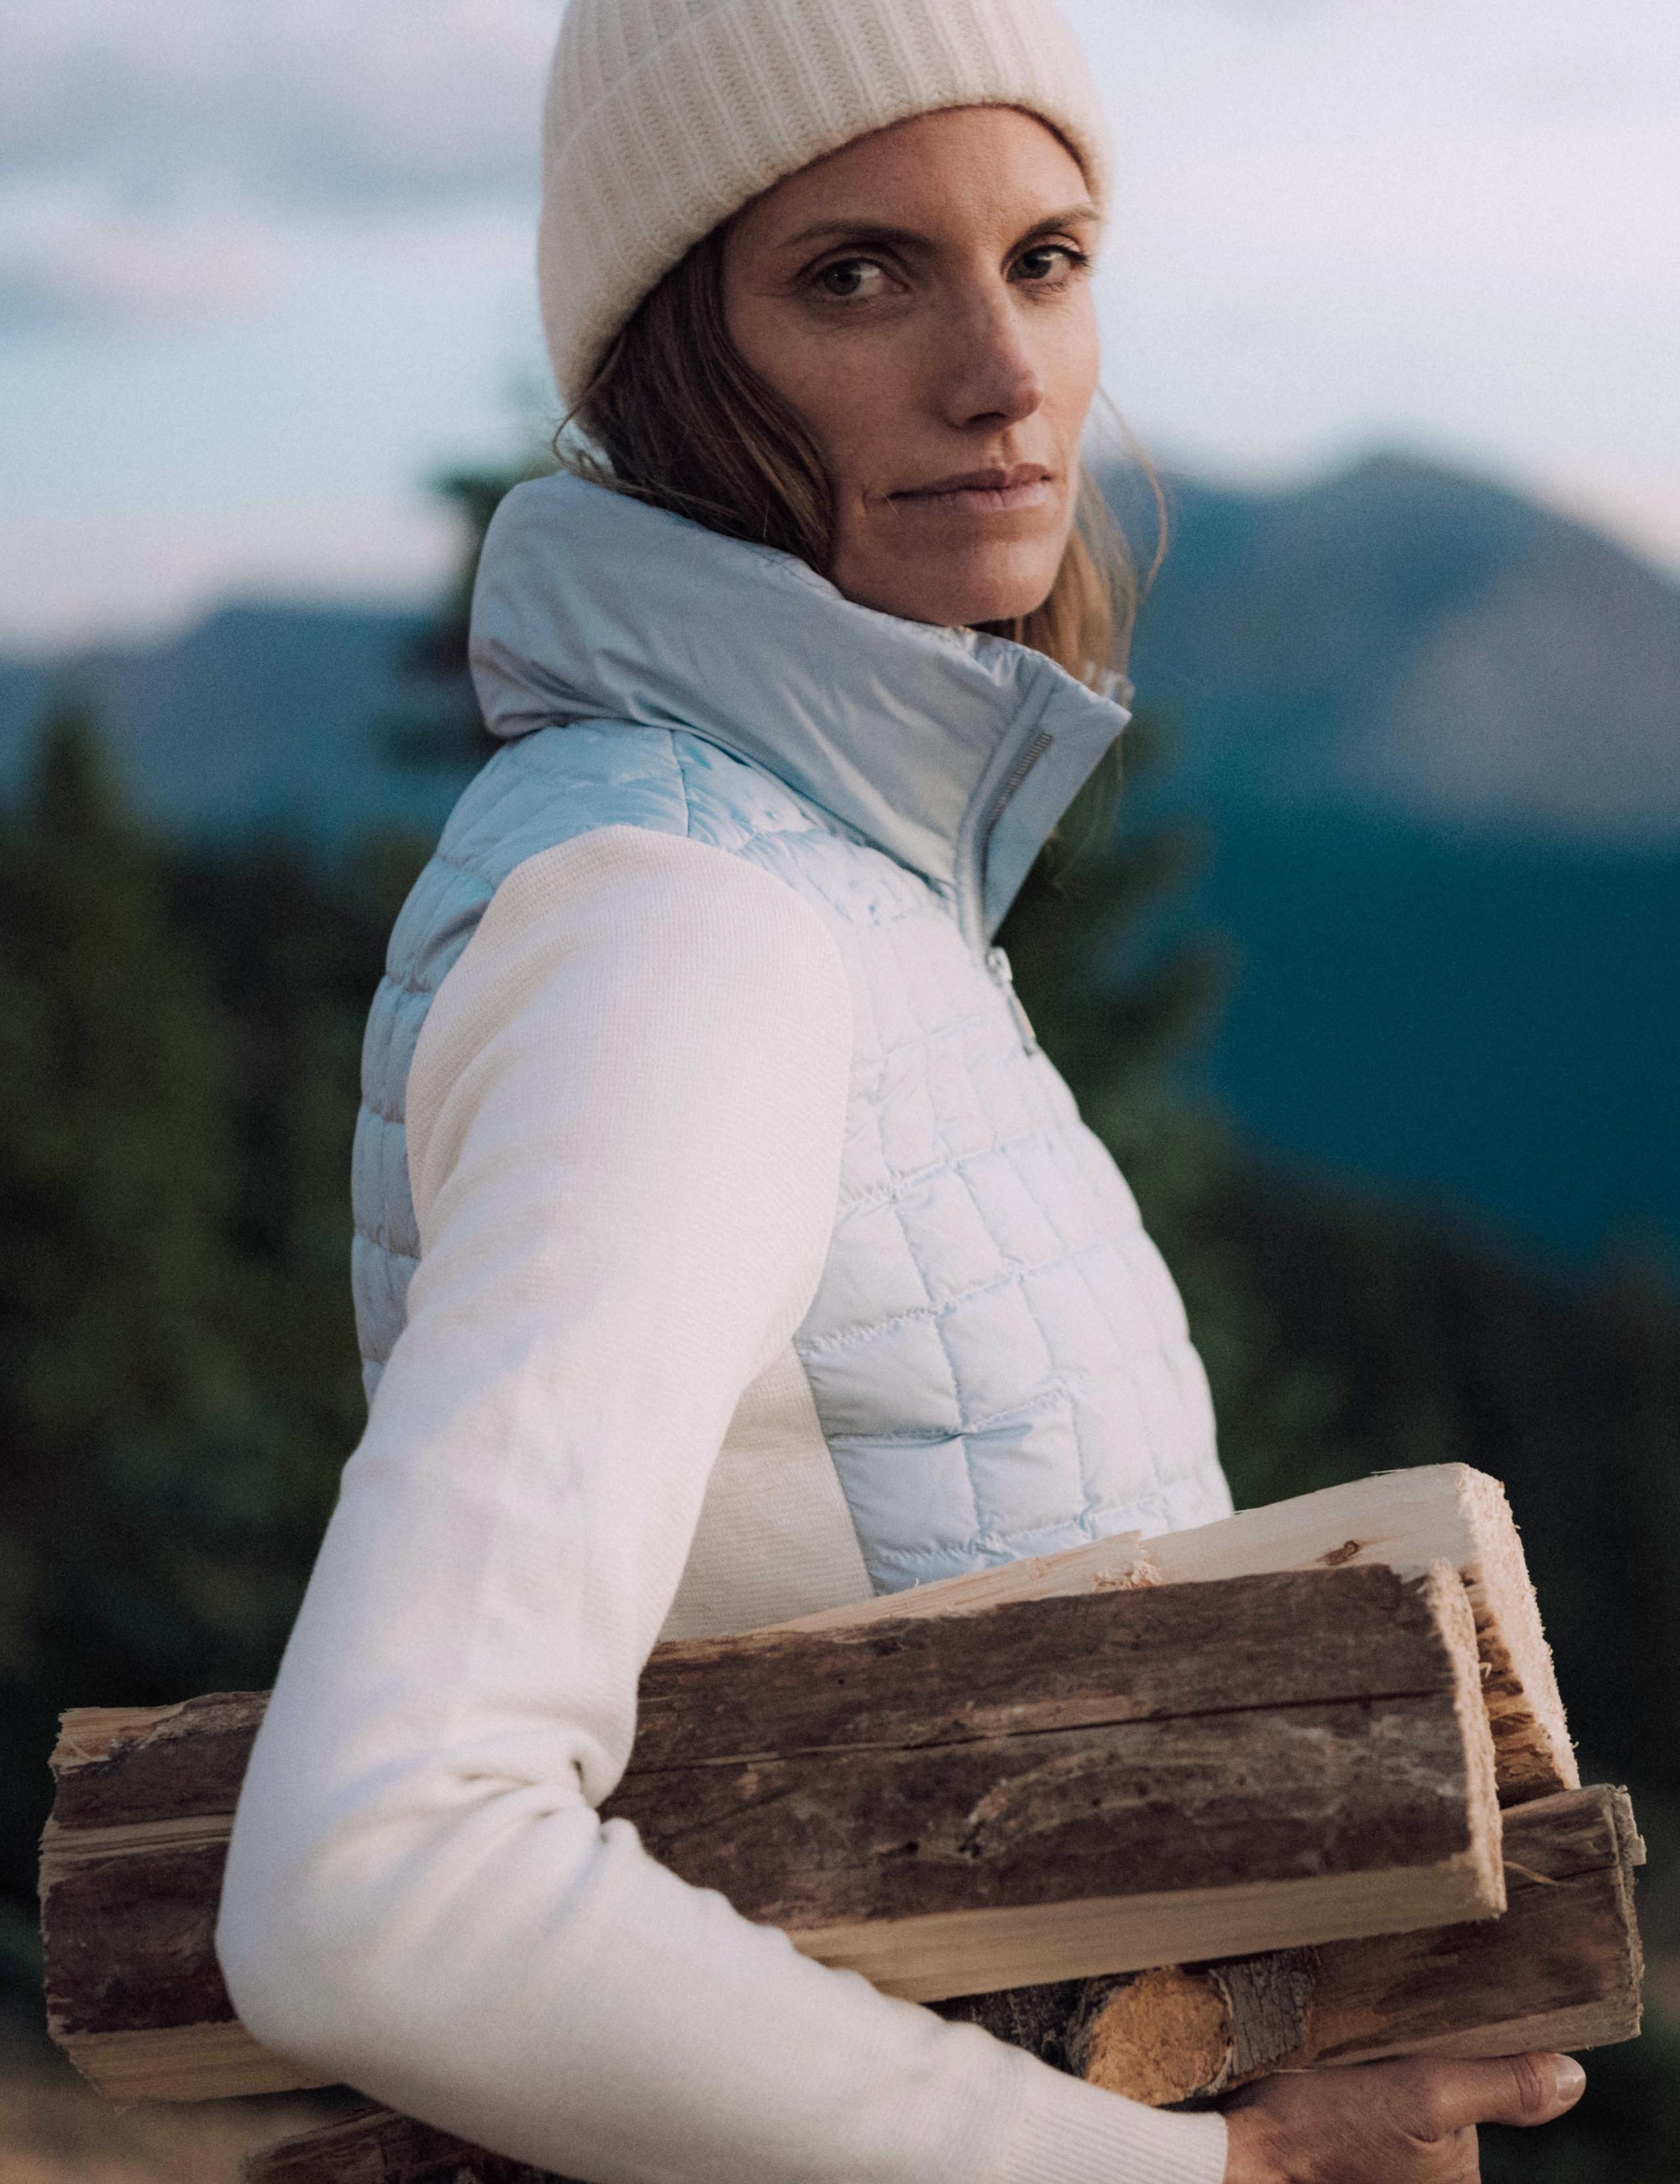 Woman holding chopped wood with Aspen mountains in background